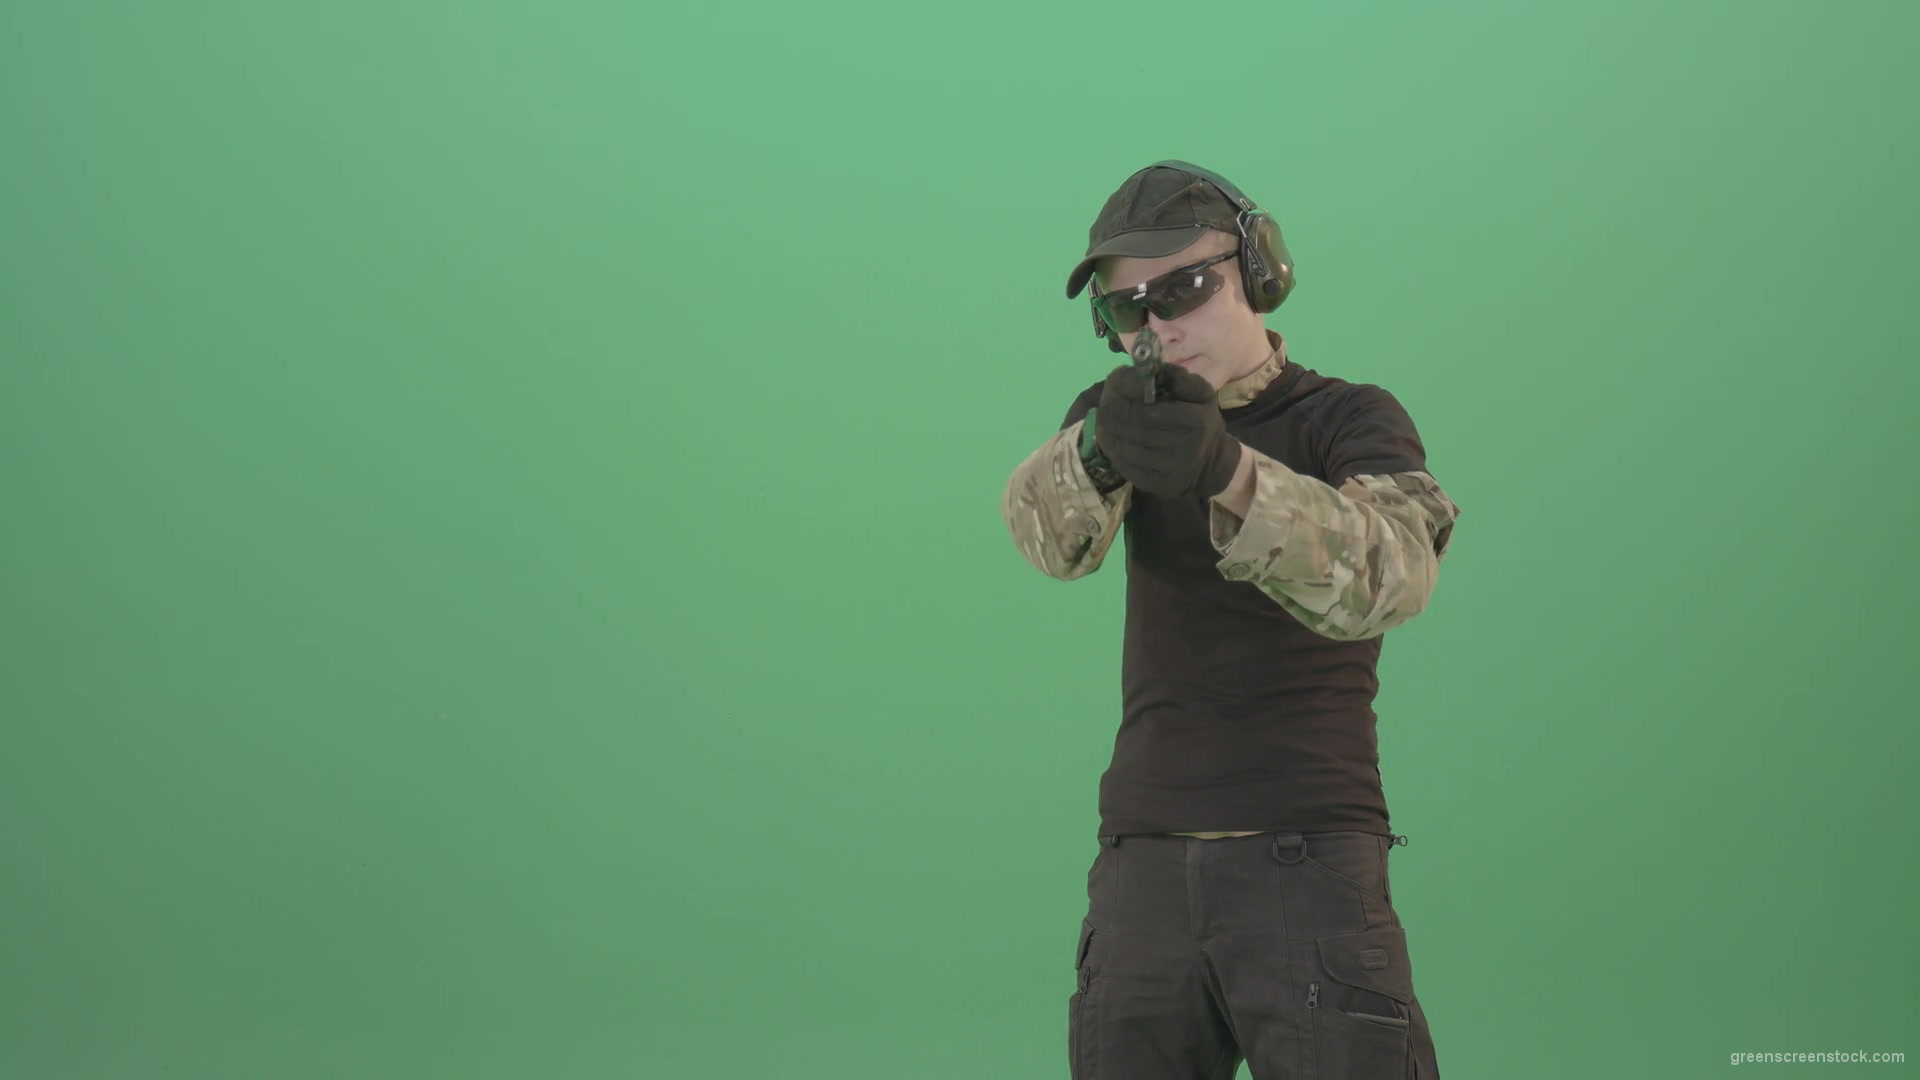 Young-boy-sodier-testin-small-pistol-gun-and-shooting-isolated-on-green-screen-4K-Video-Footage-1920_007 Green Screen Stock